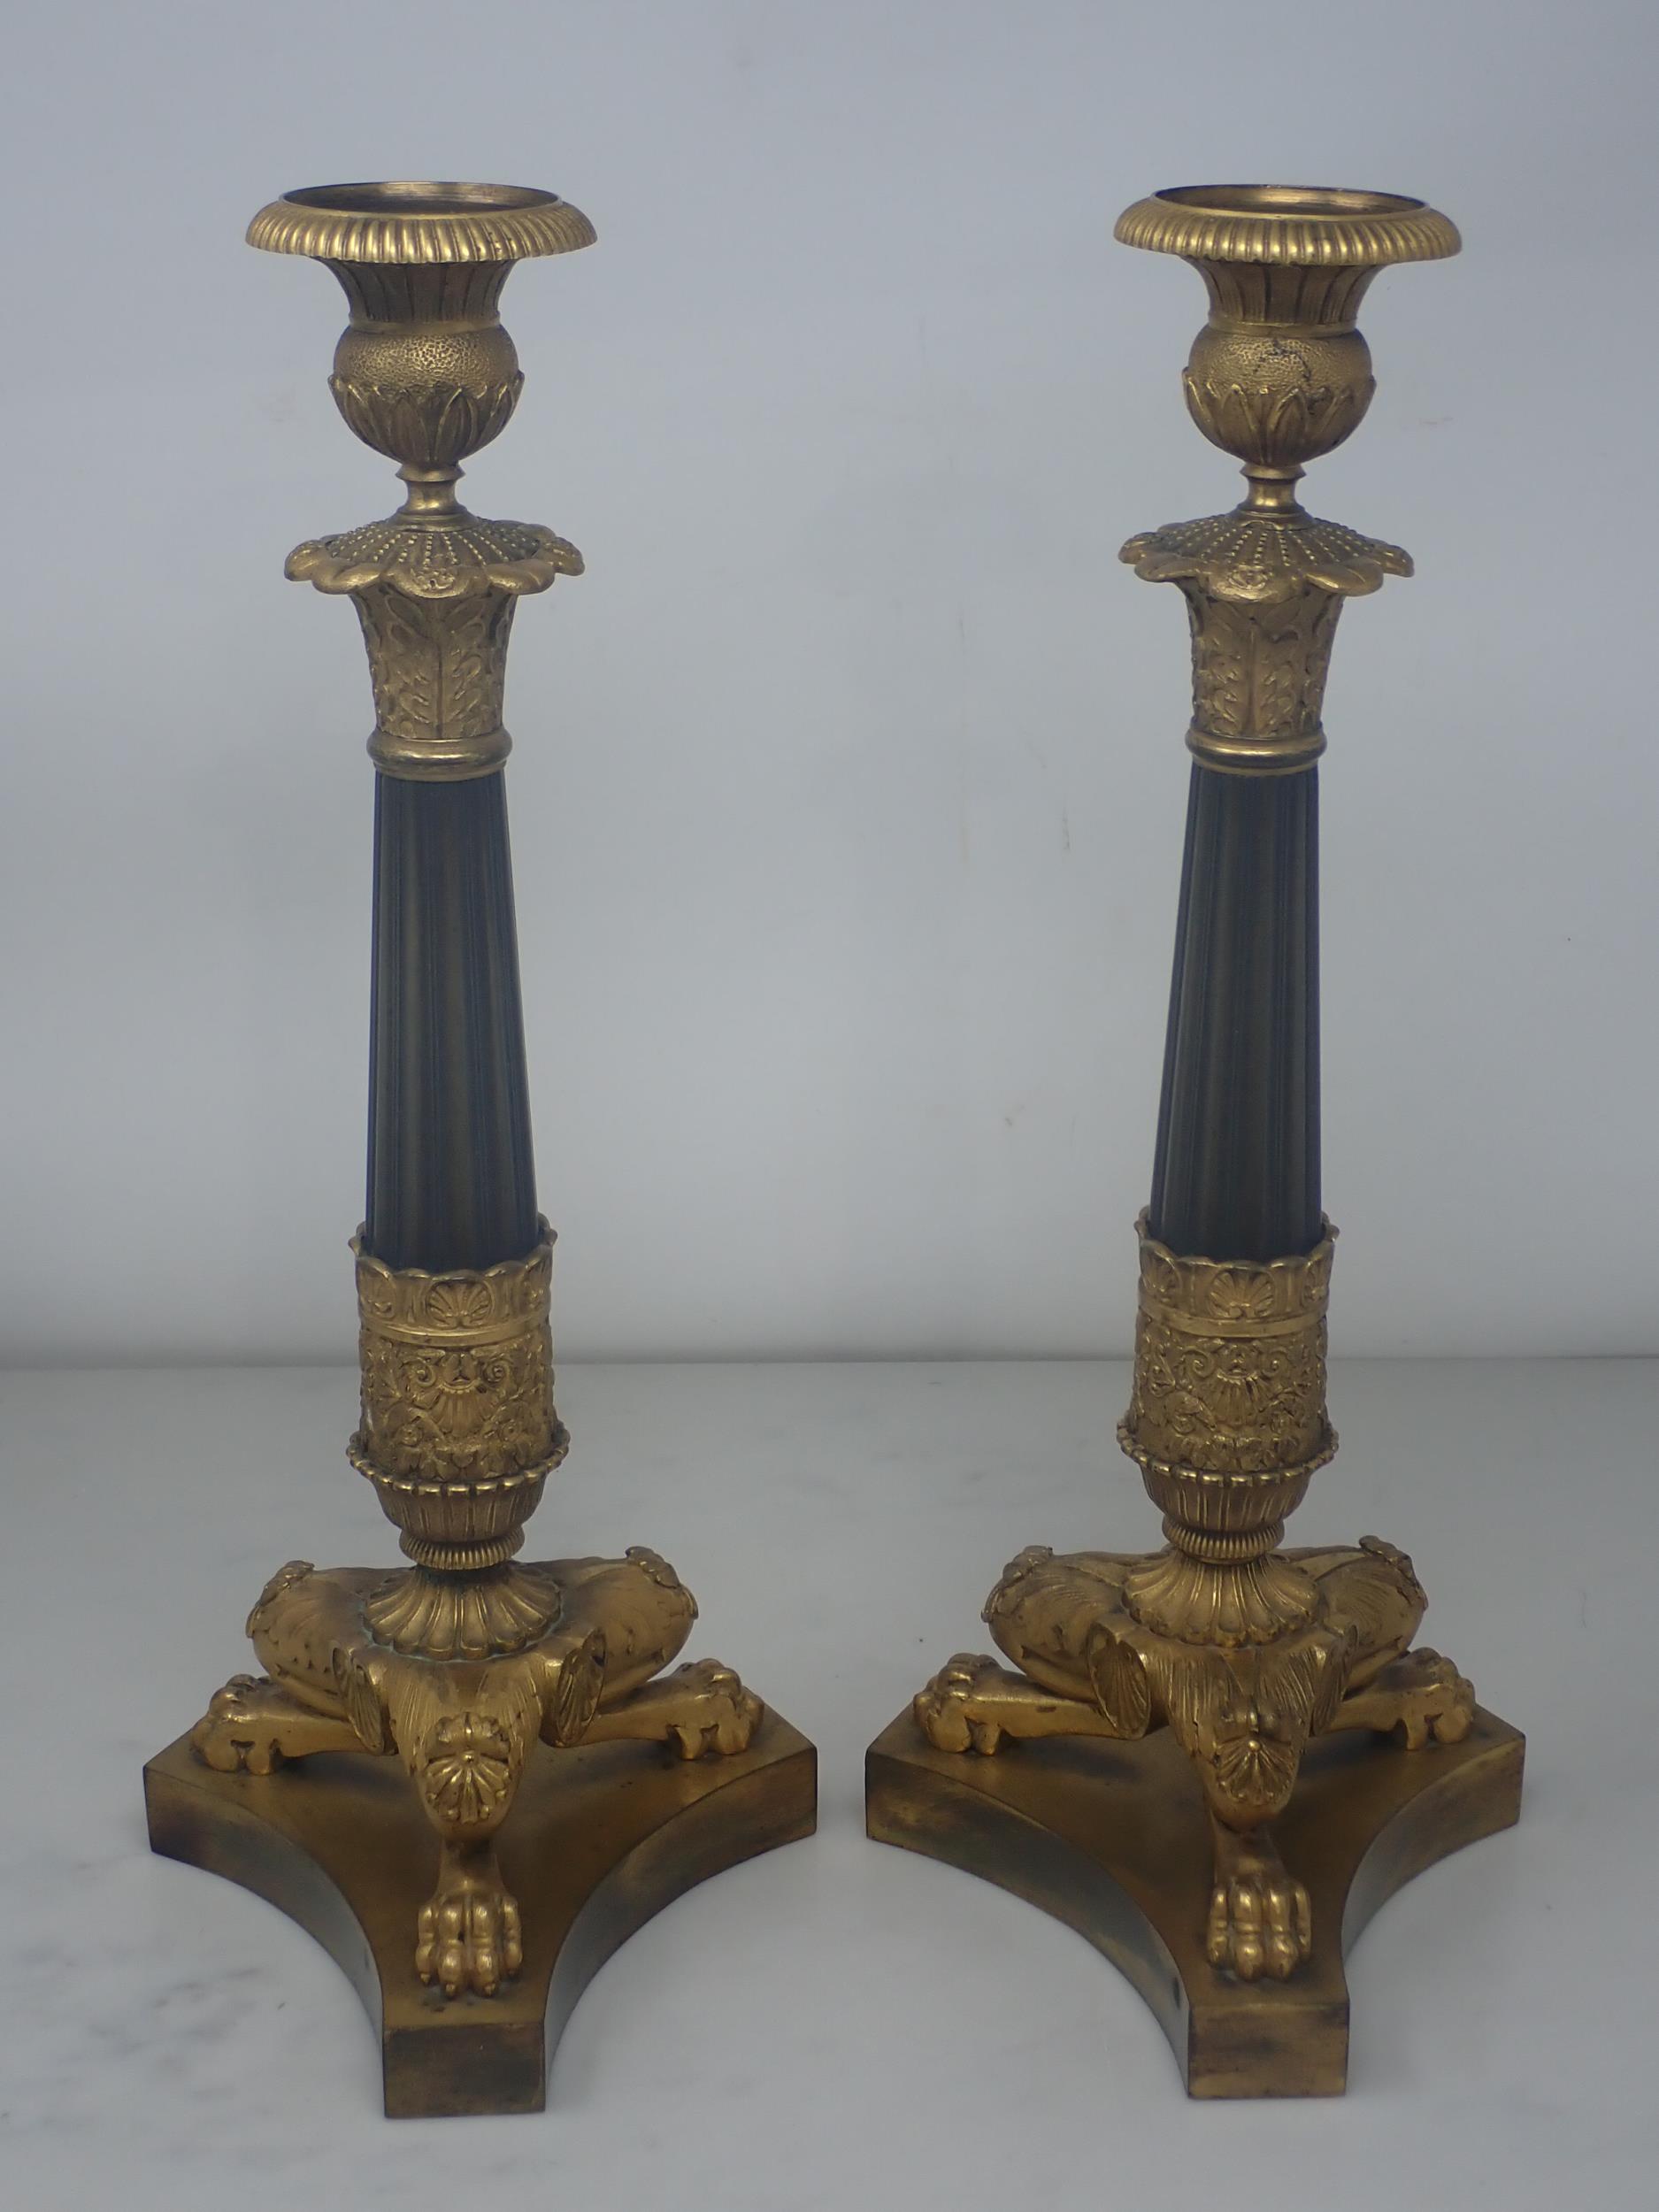 A pair of French Empire Candlesticks in ormolu and bronze, with classical mouldings, plain bronze - Image 2 of 5